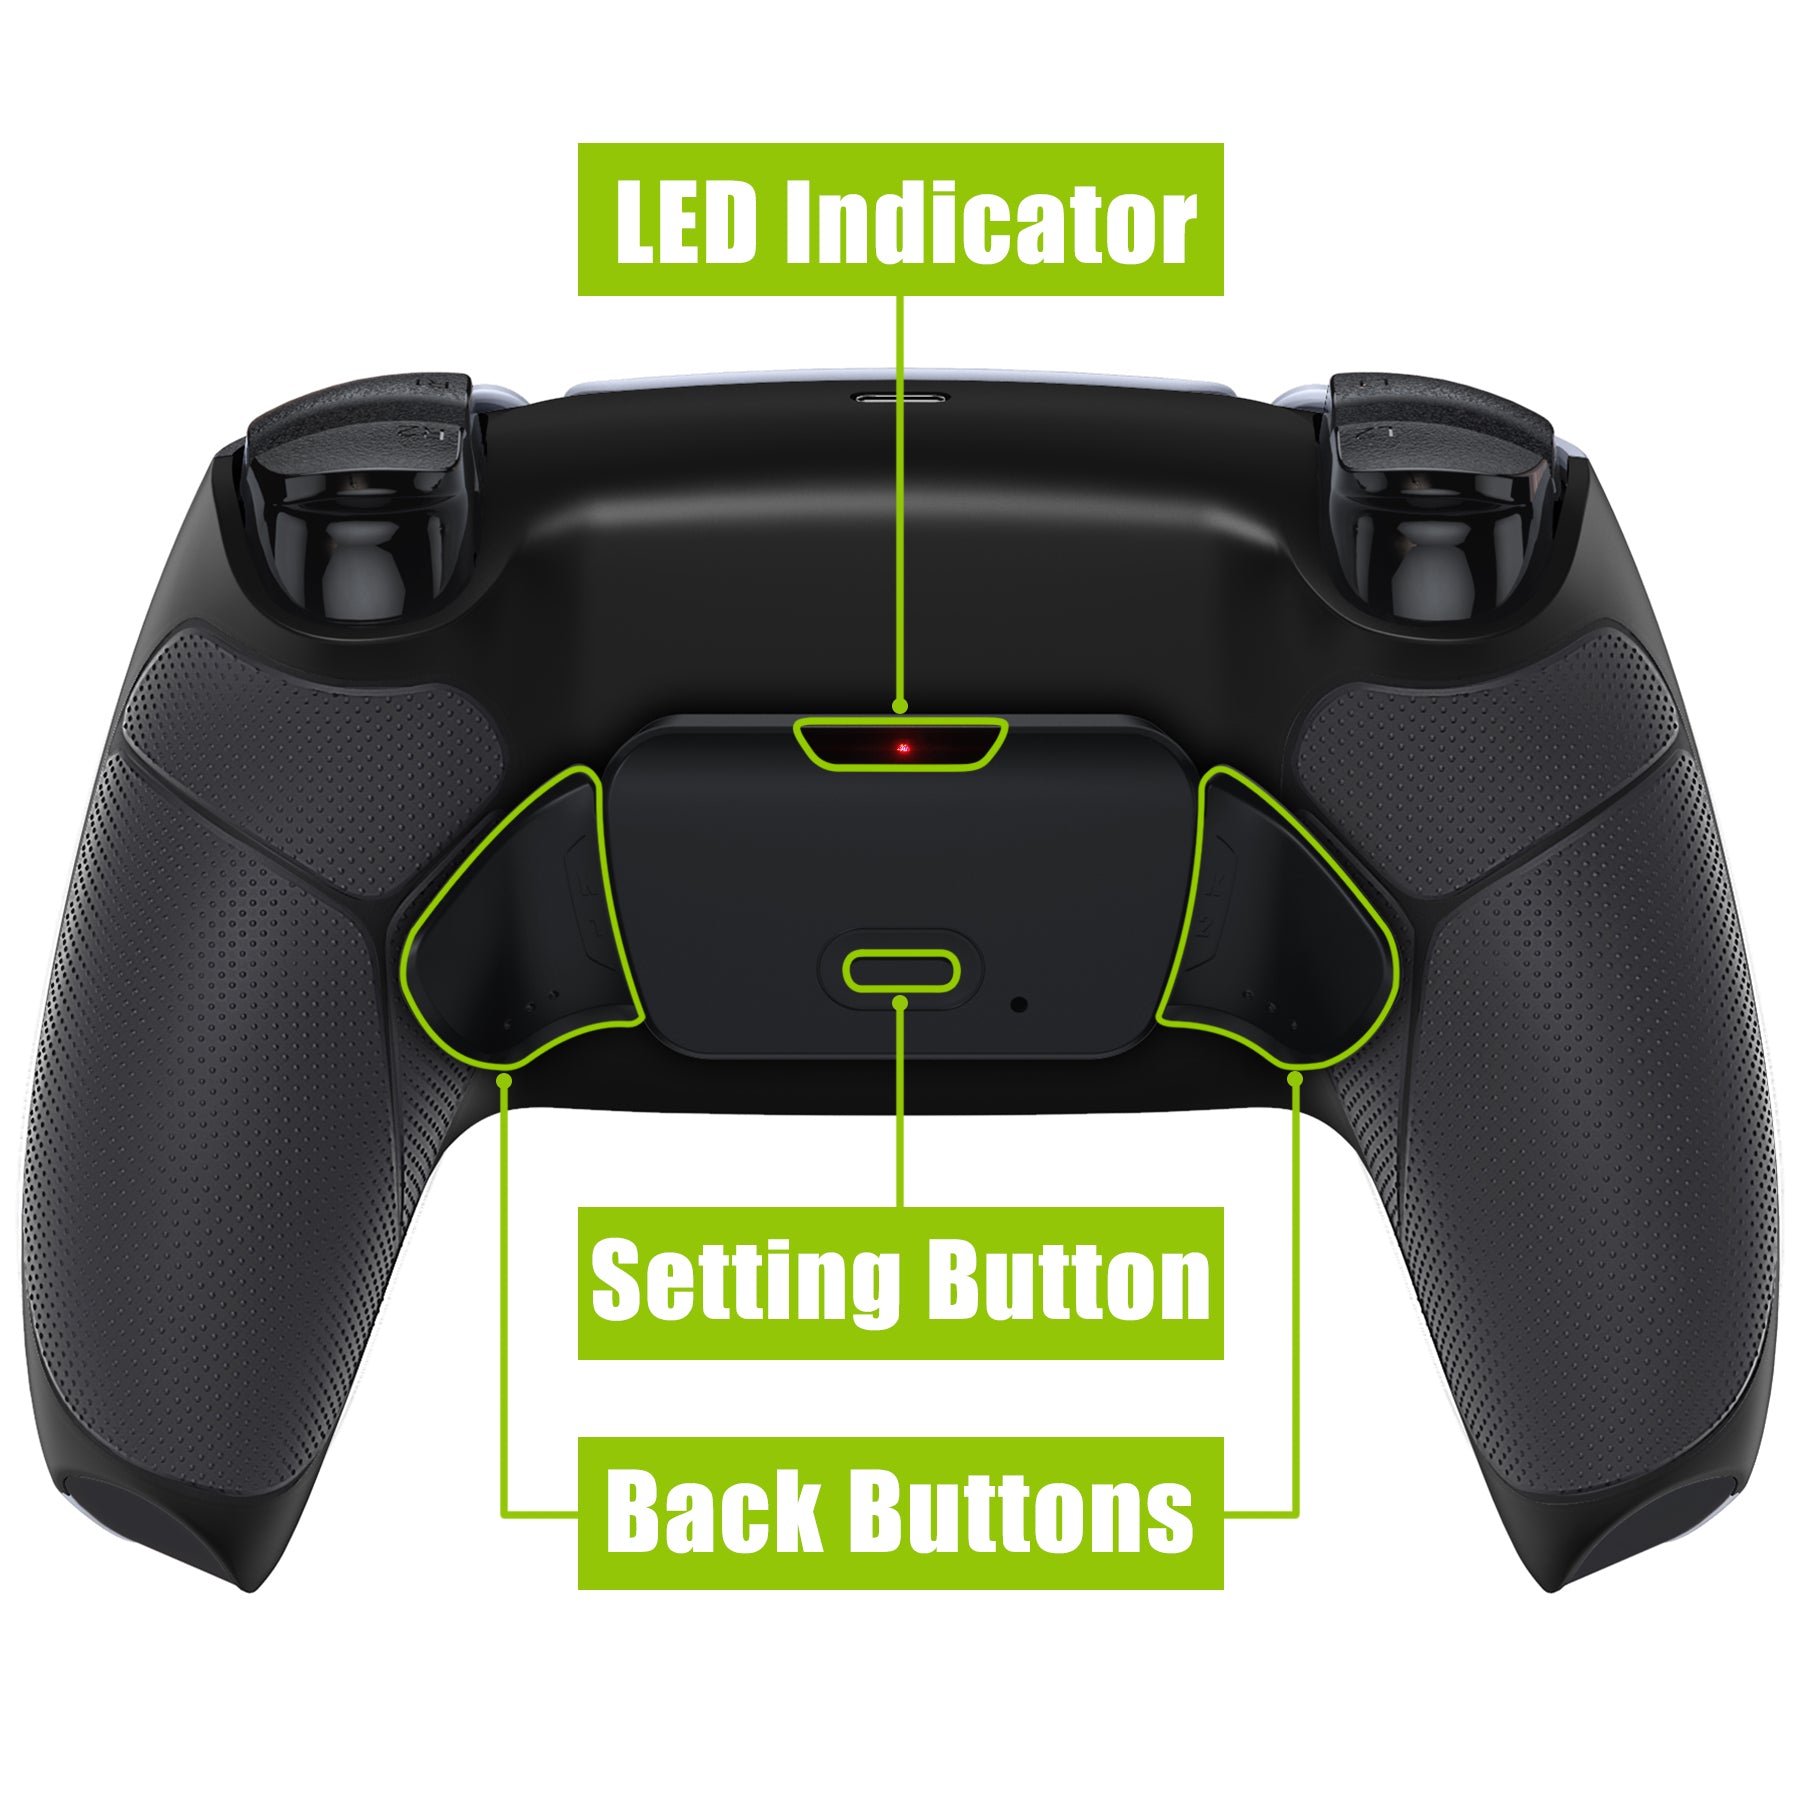 PS5 controller back paddles / button installation! This is the easy me, ps5 paddles